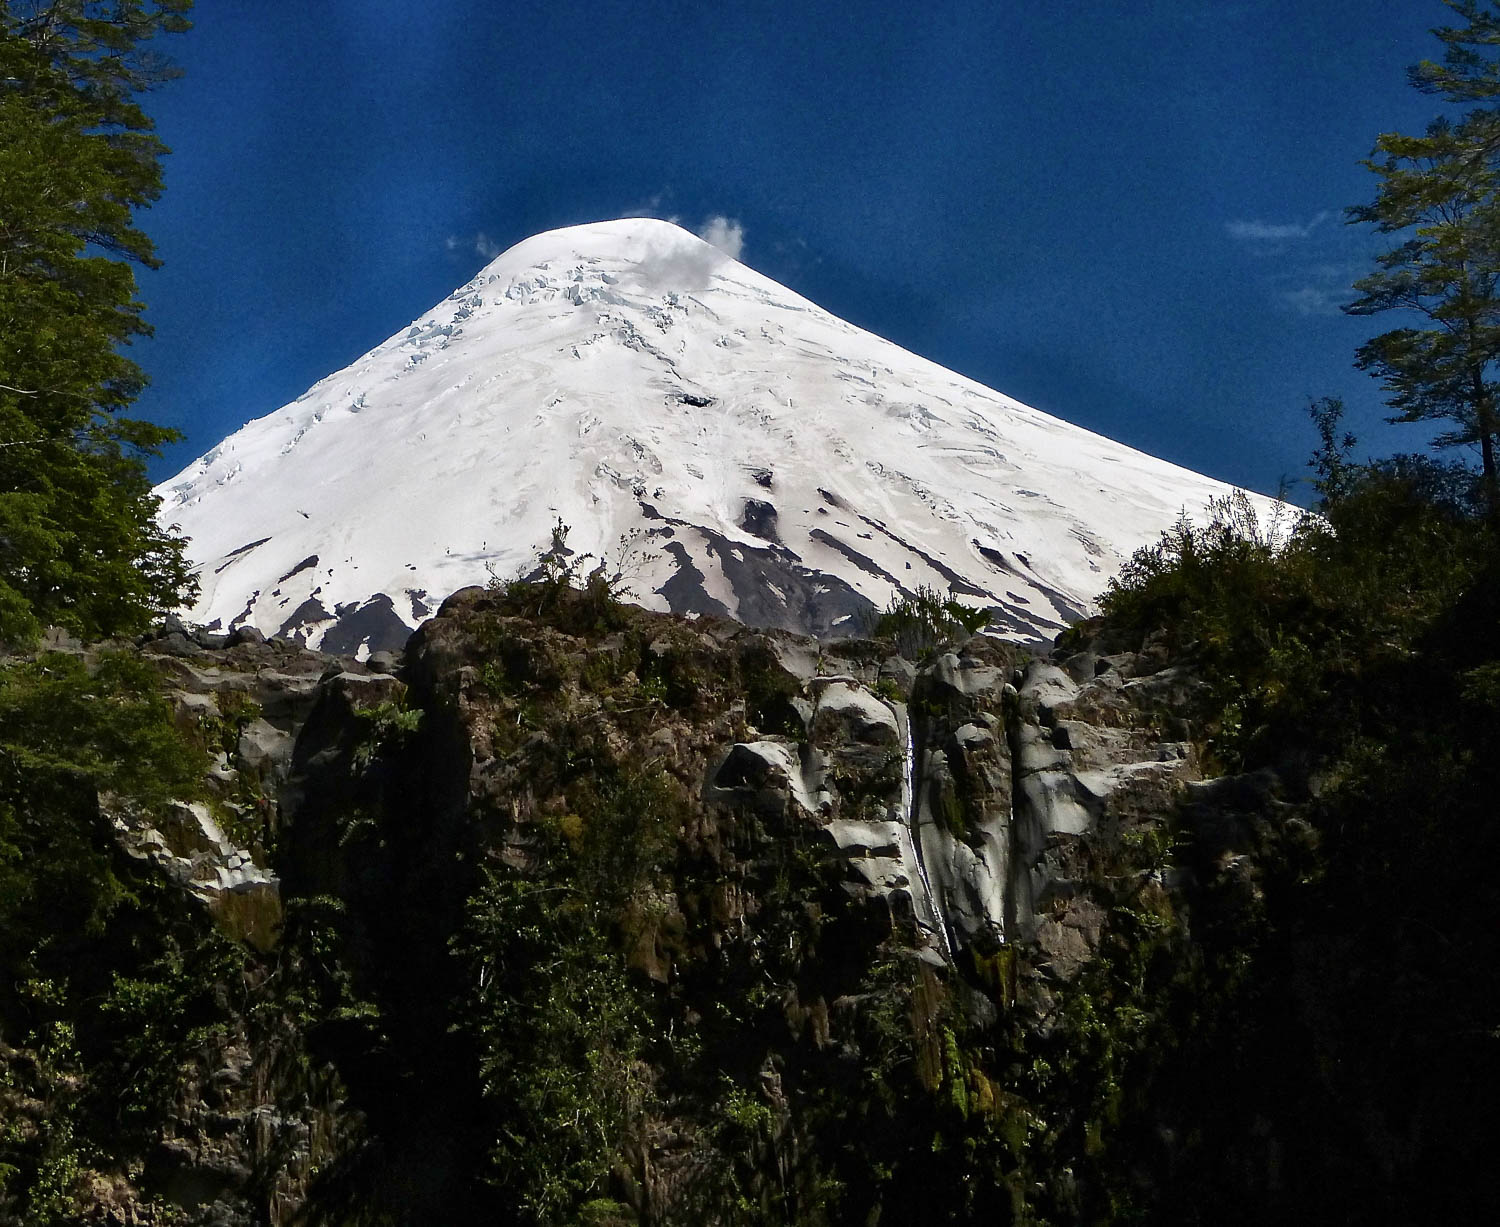 ePostcard #143: Fire and Ice: Volcán Osorno